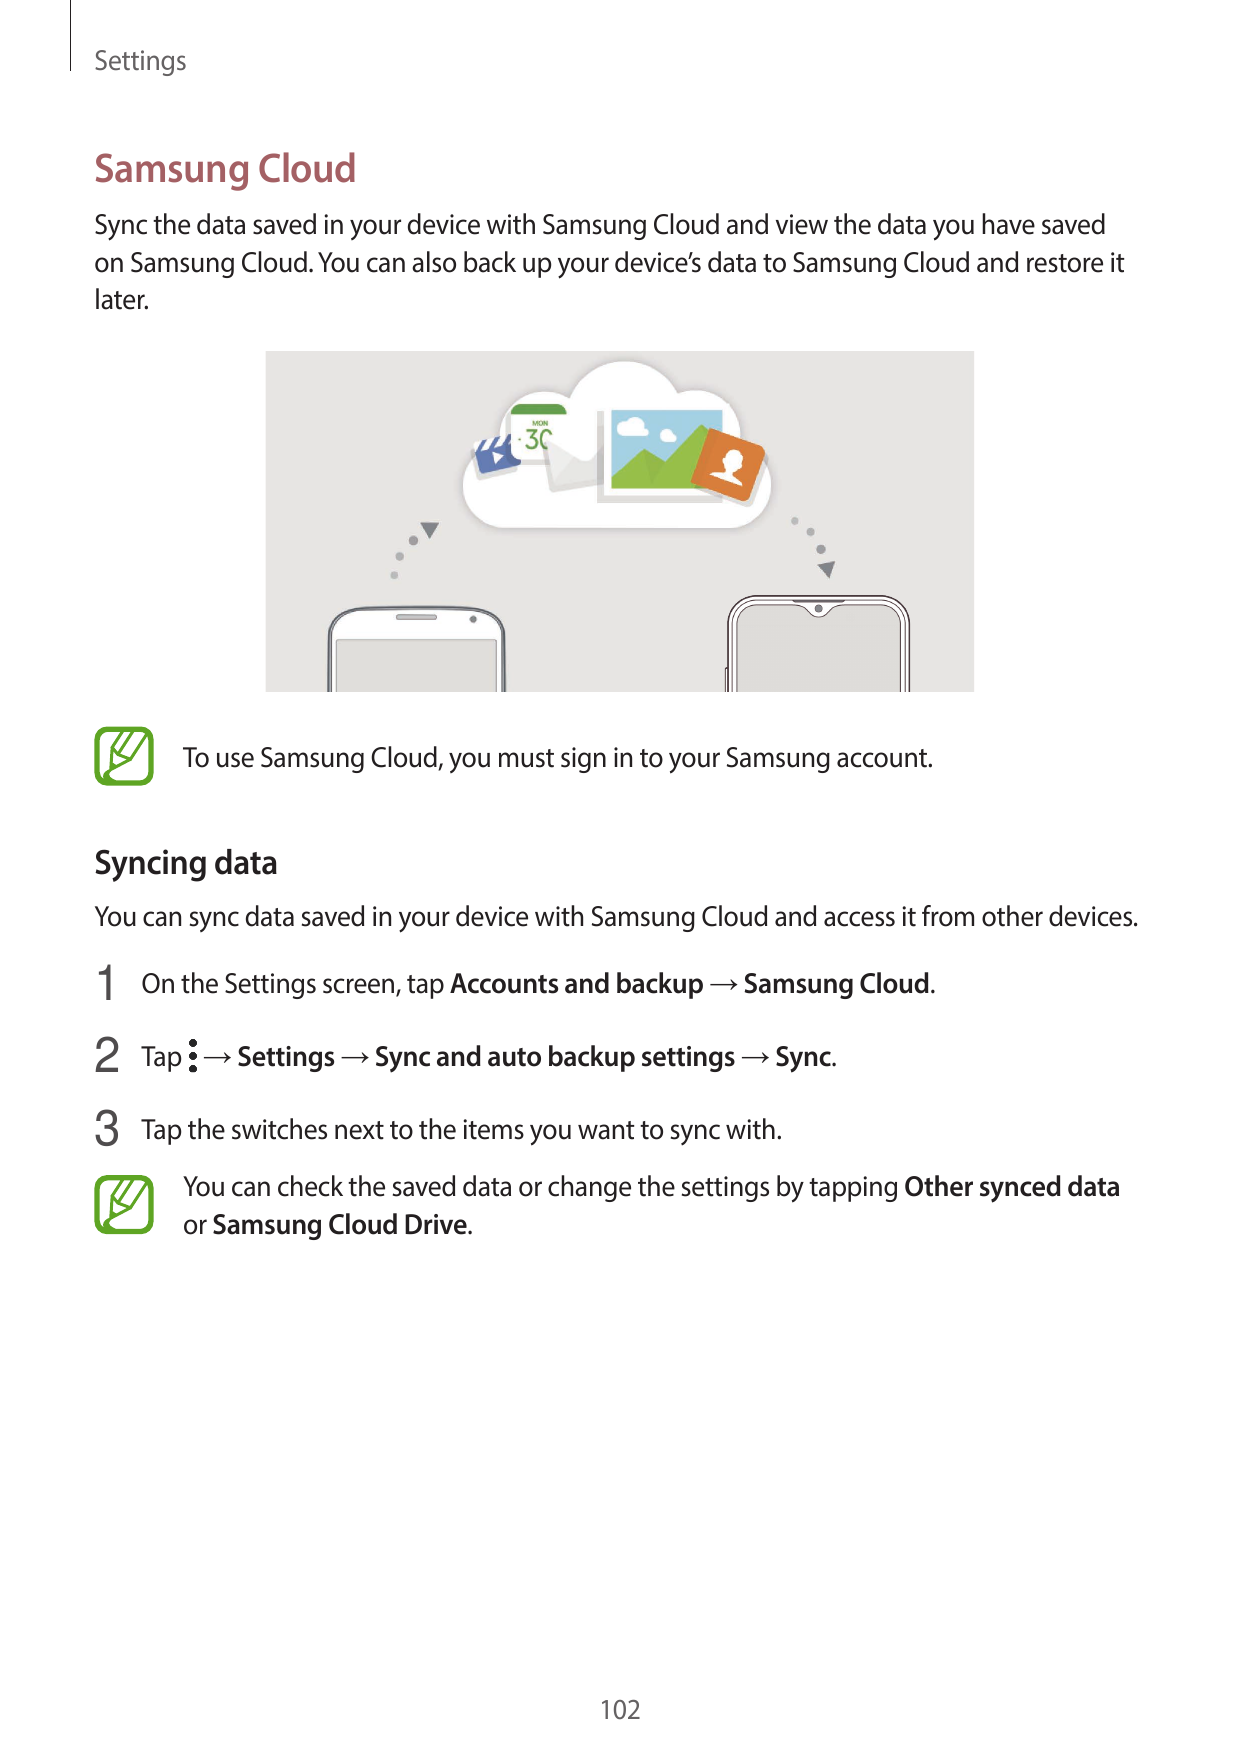 SettingsSamsung CloudSync the data saved in your device with Samsung Cloud and view the data you have savedon Samsung Cloud. You